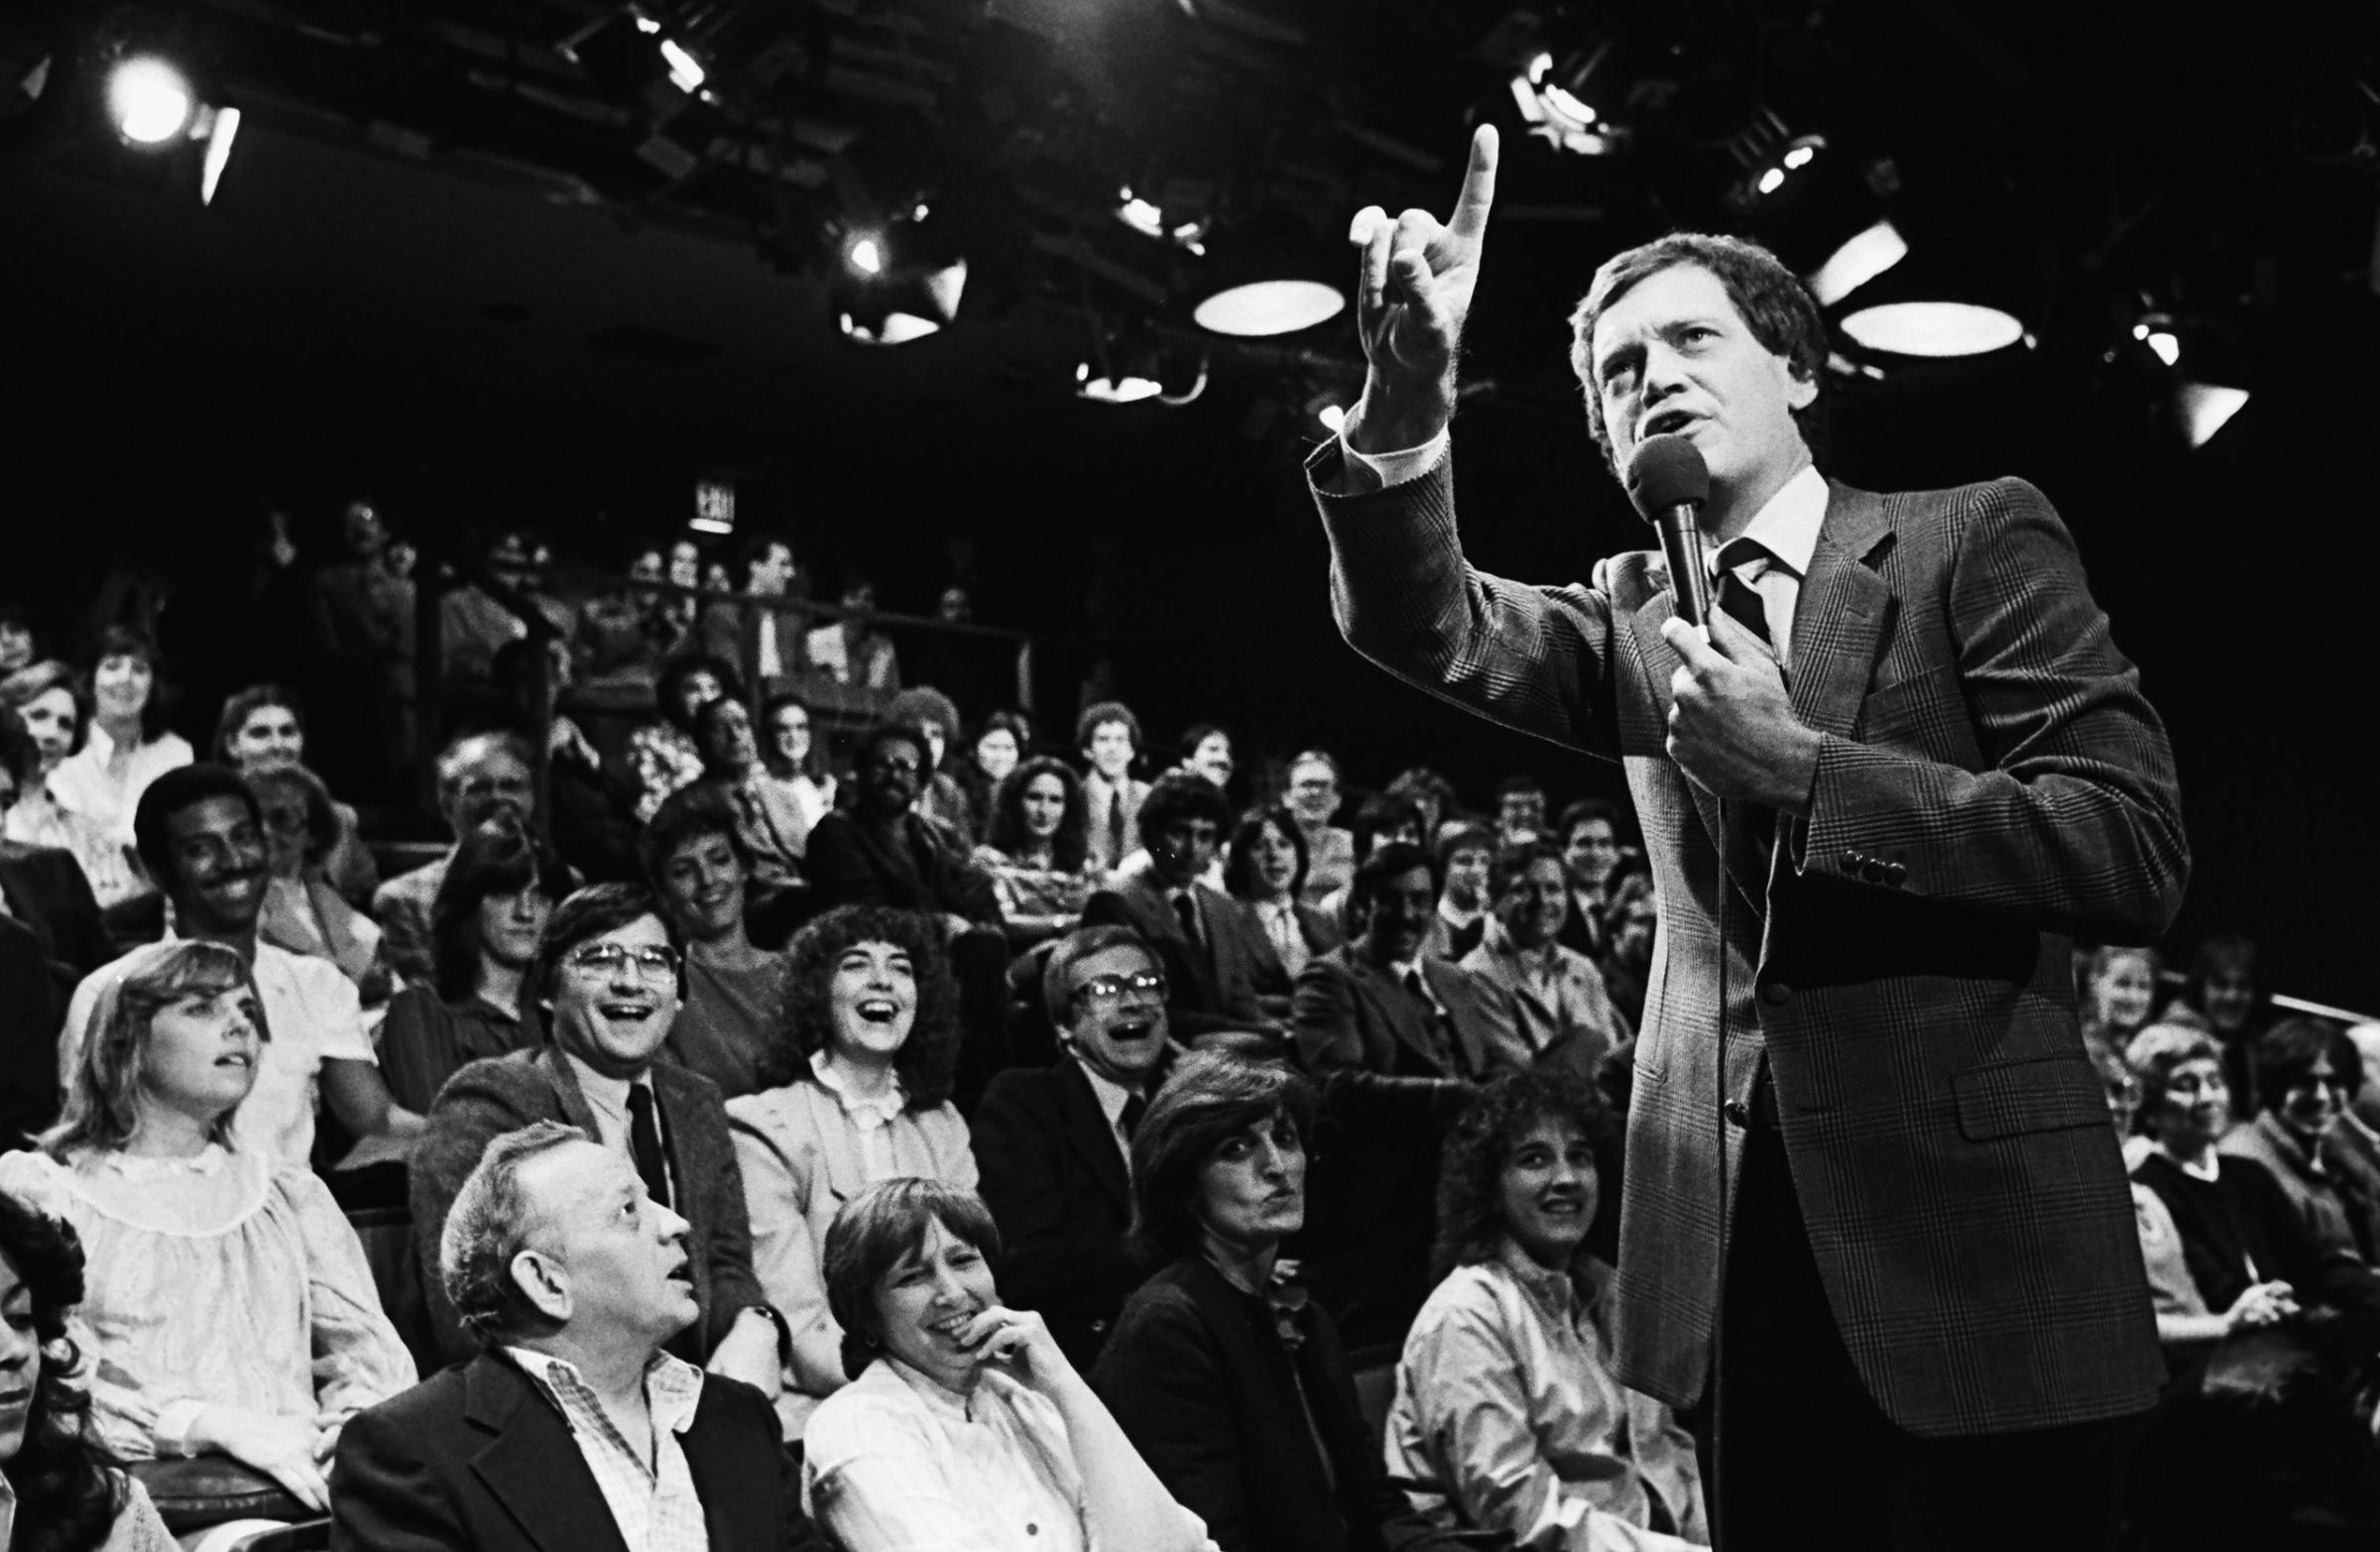 Comedian and late night television host, David Letterman, warms up his NBC studio audience prior to the taping of his popular 1982 New York, NY, television show at Rockefeller Center, 1982.